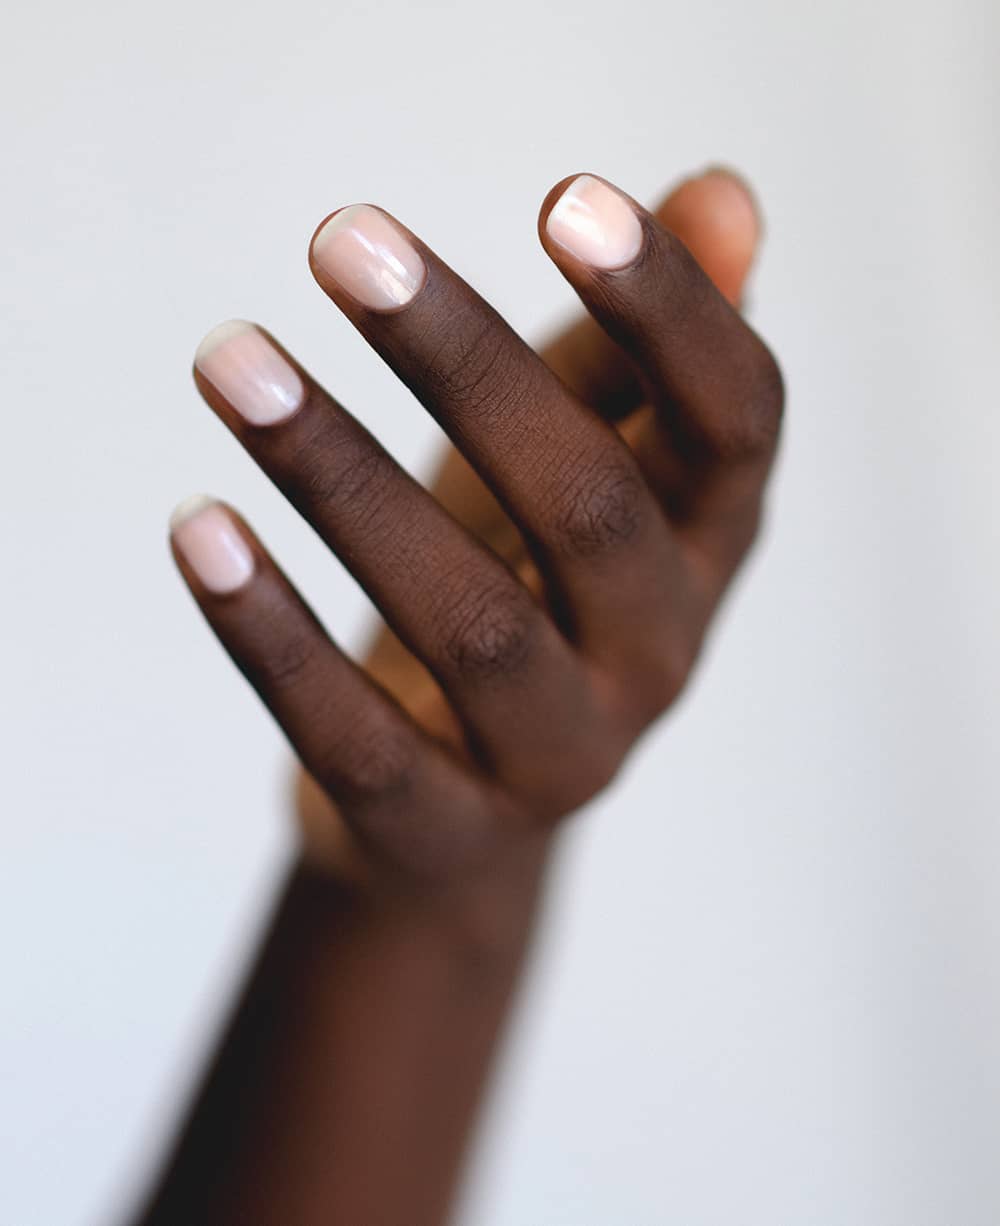 Translucent rosewater pink sheer nail polish hand swatch on dark skin tone by sienna